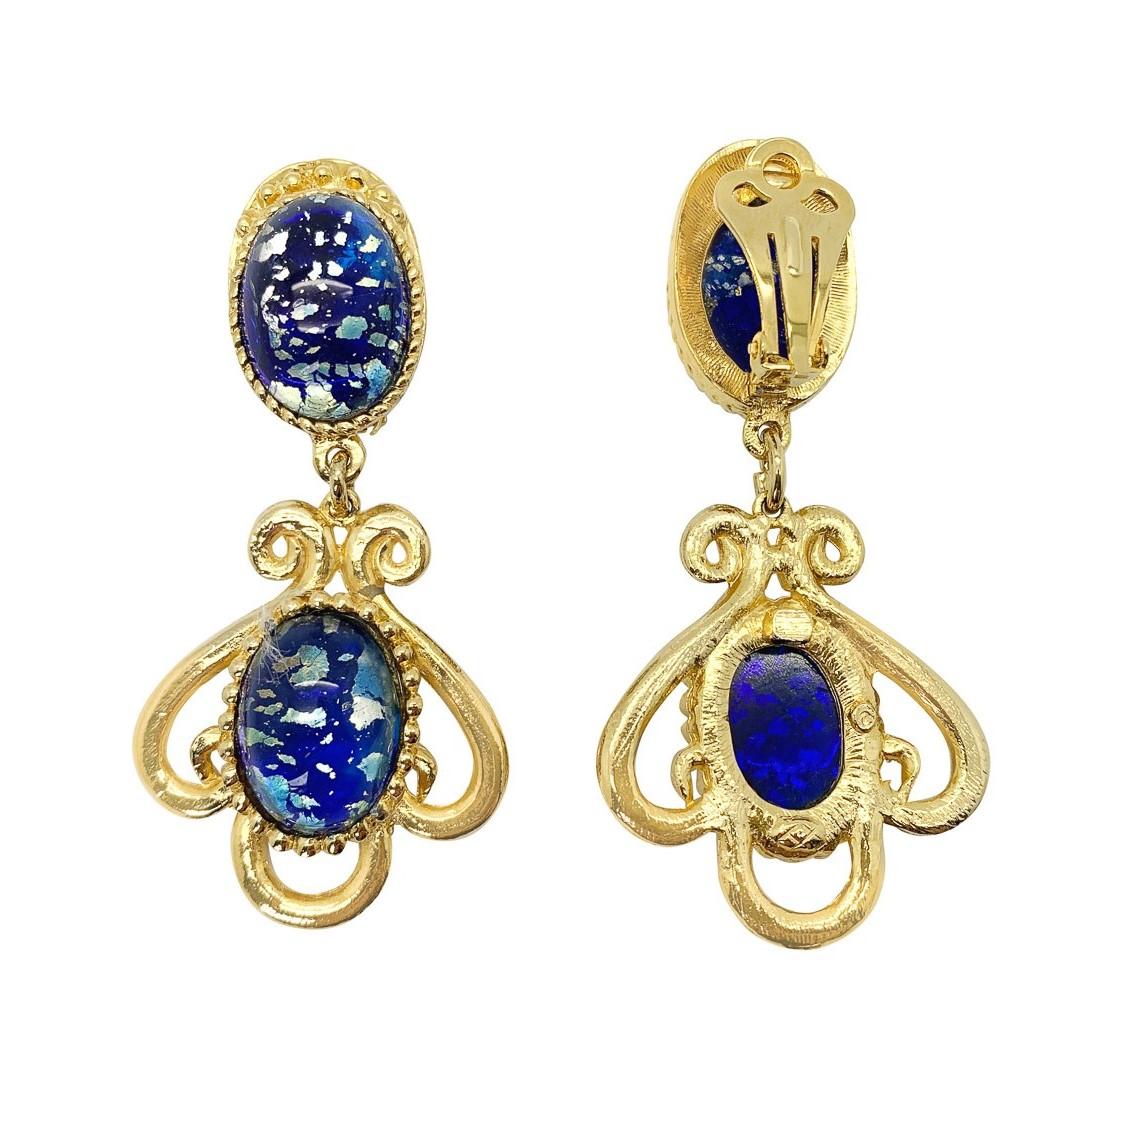 An ultra pretty pair of Vintage Cosmic Glass Earrings. Featuring elaborate golden mounts set with large and captivating glass cabochon stones radiating a cosmic feel.

Vintage Condition: Very good without damage or noteworthy wear.
Materials: Gold